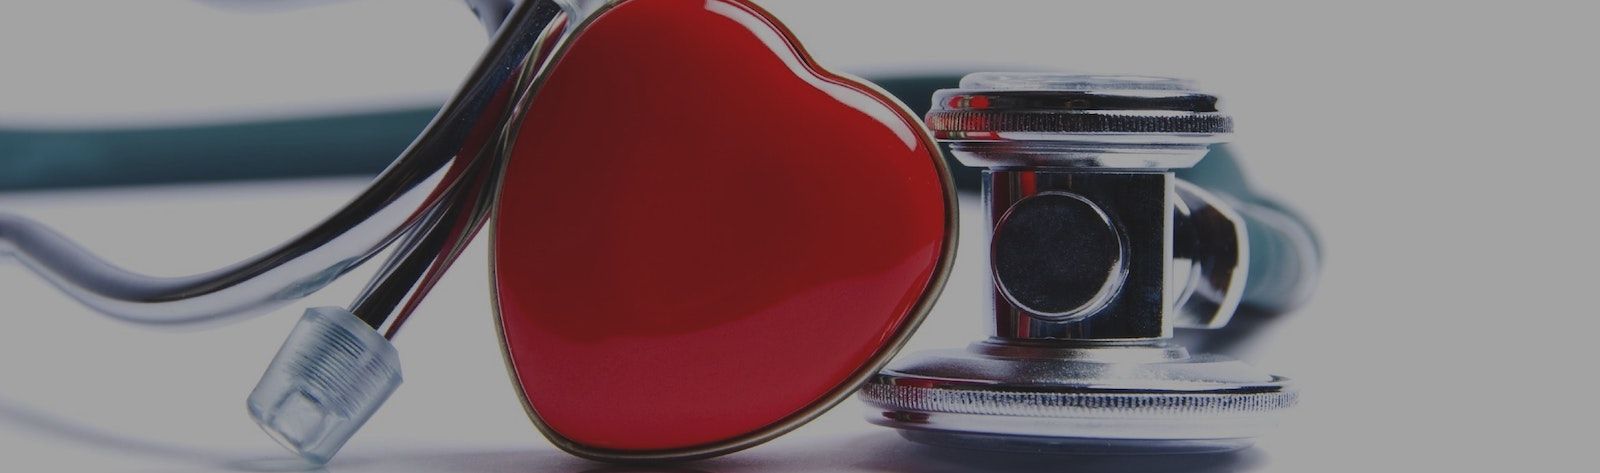 Closeup photo of a stethoscope and a bright red enamel heart. The heart is in the middle with the stethoscope's eartip to its left and the chestpiece on its right.